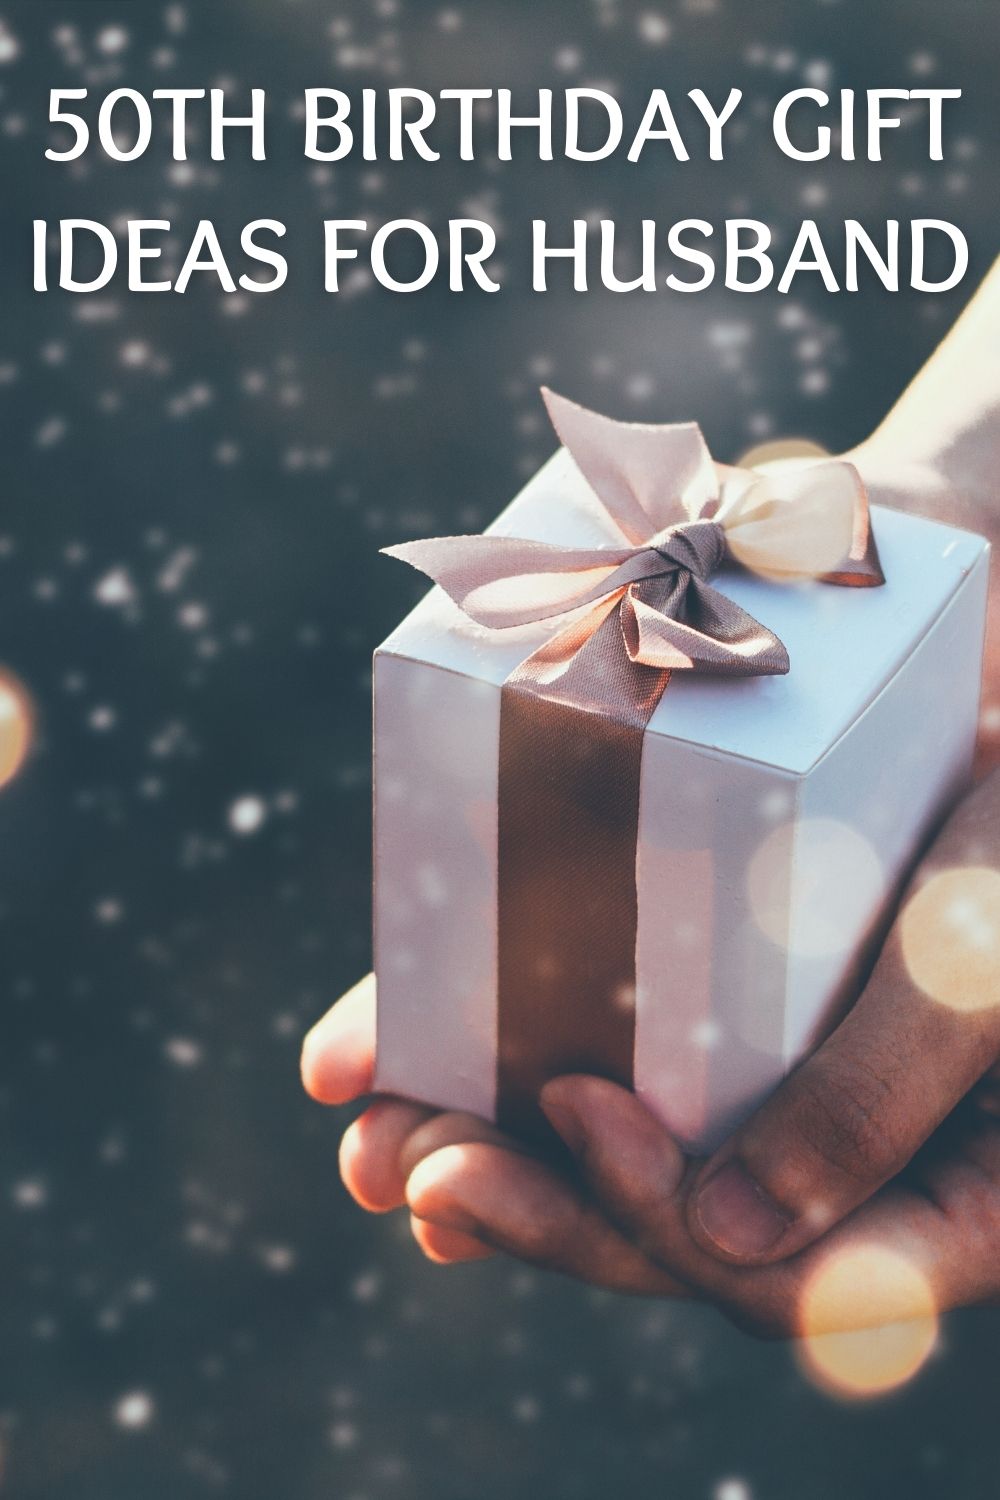 50th Birthday Gift Ideas for Husband